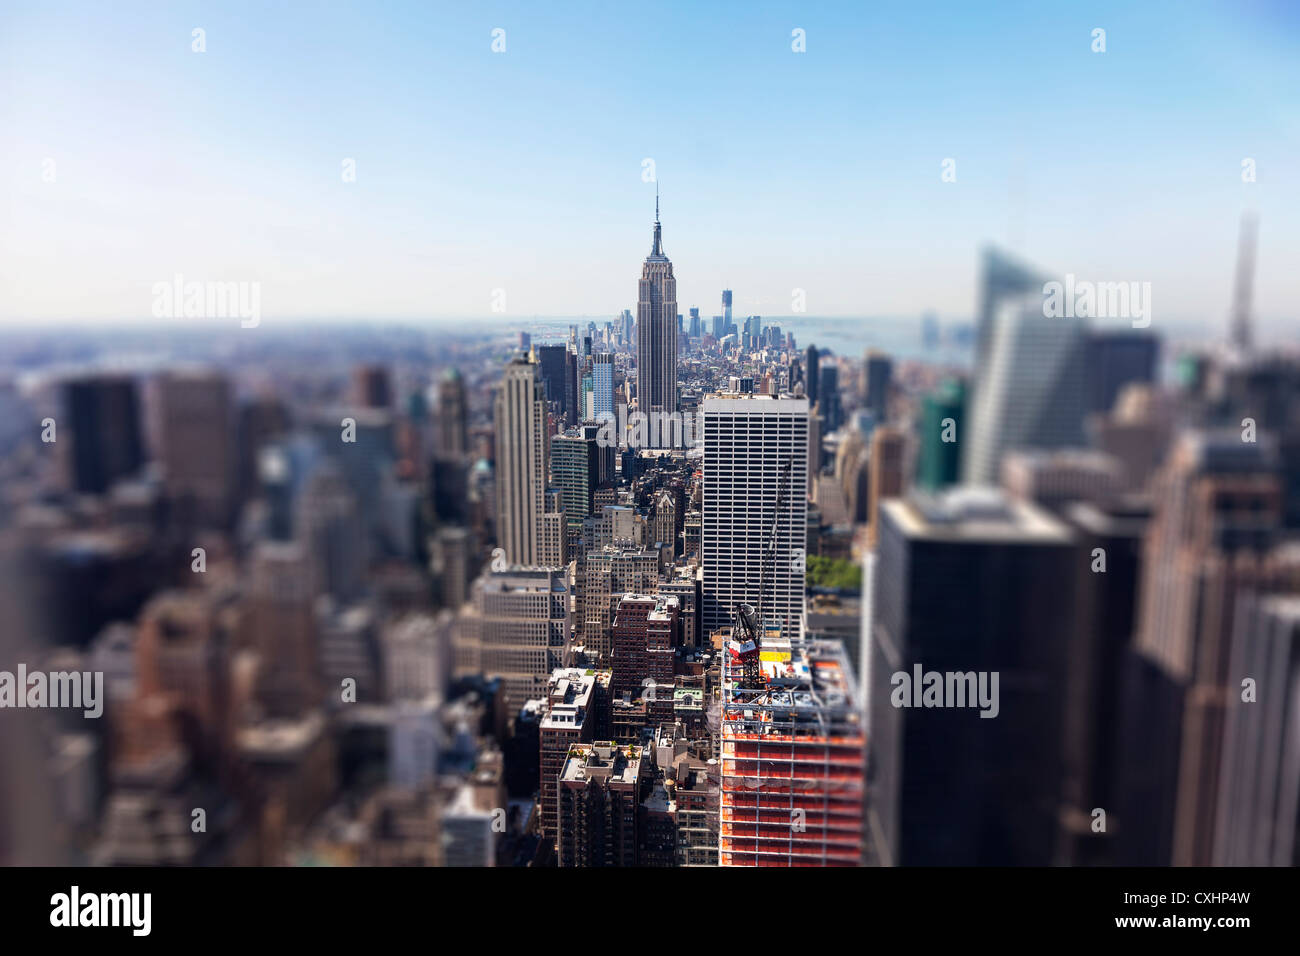 Selective focus on Empire State building New York City, NYC, NY, America Stock Photo